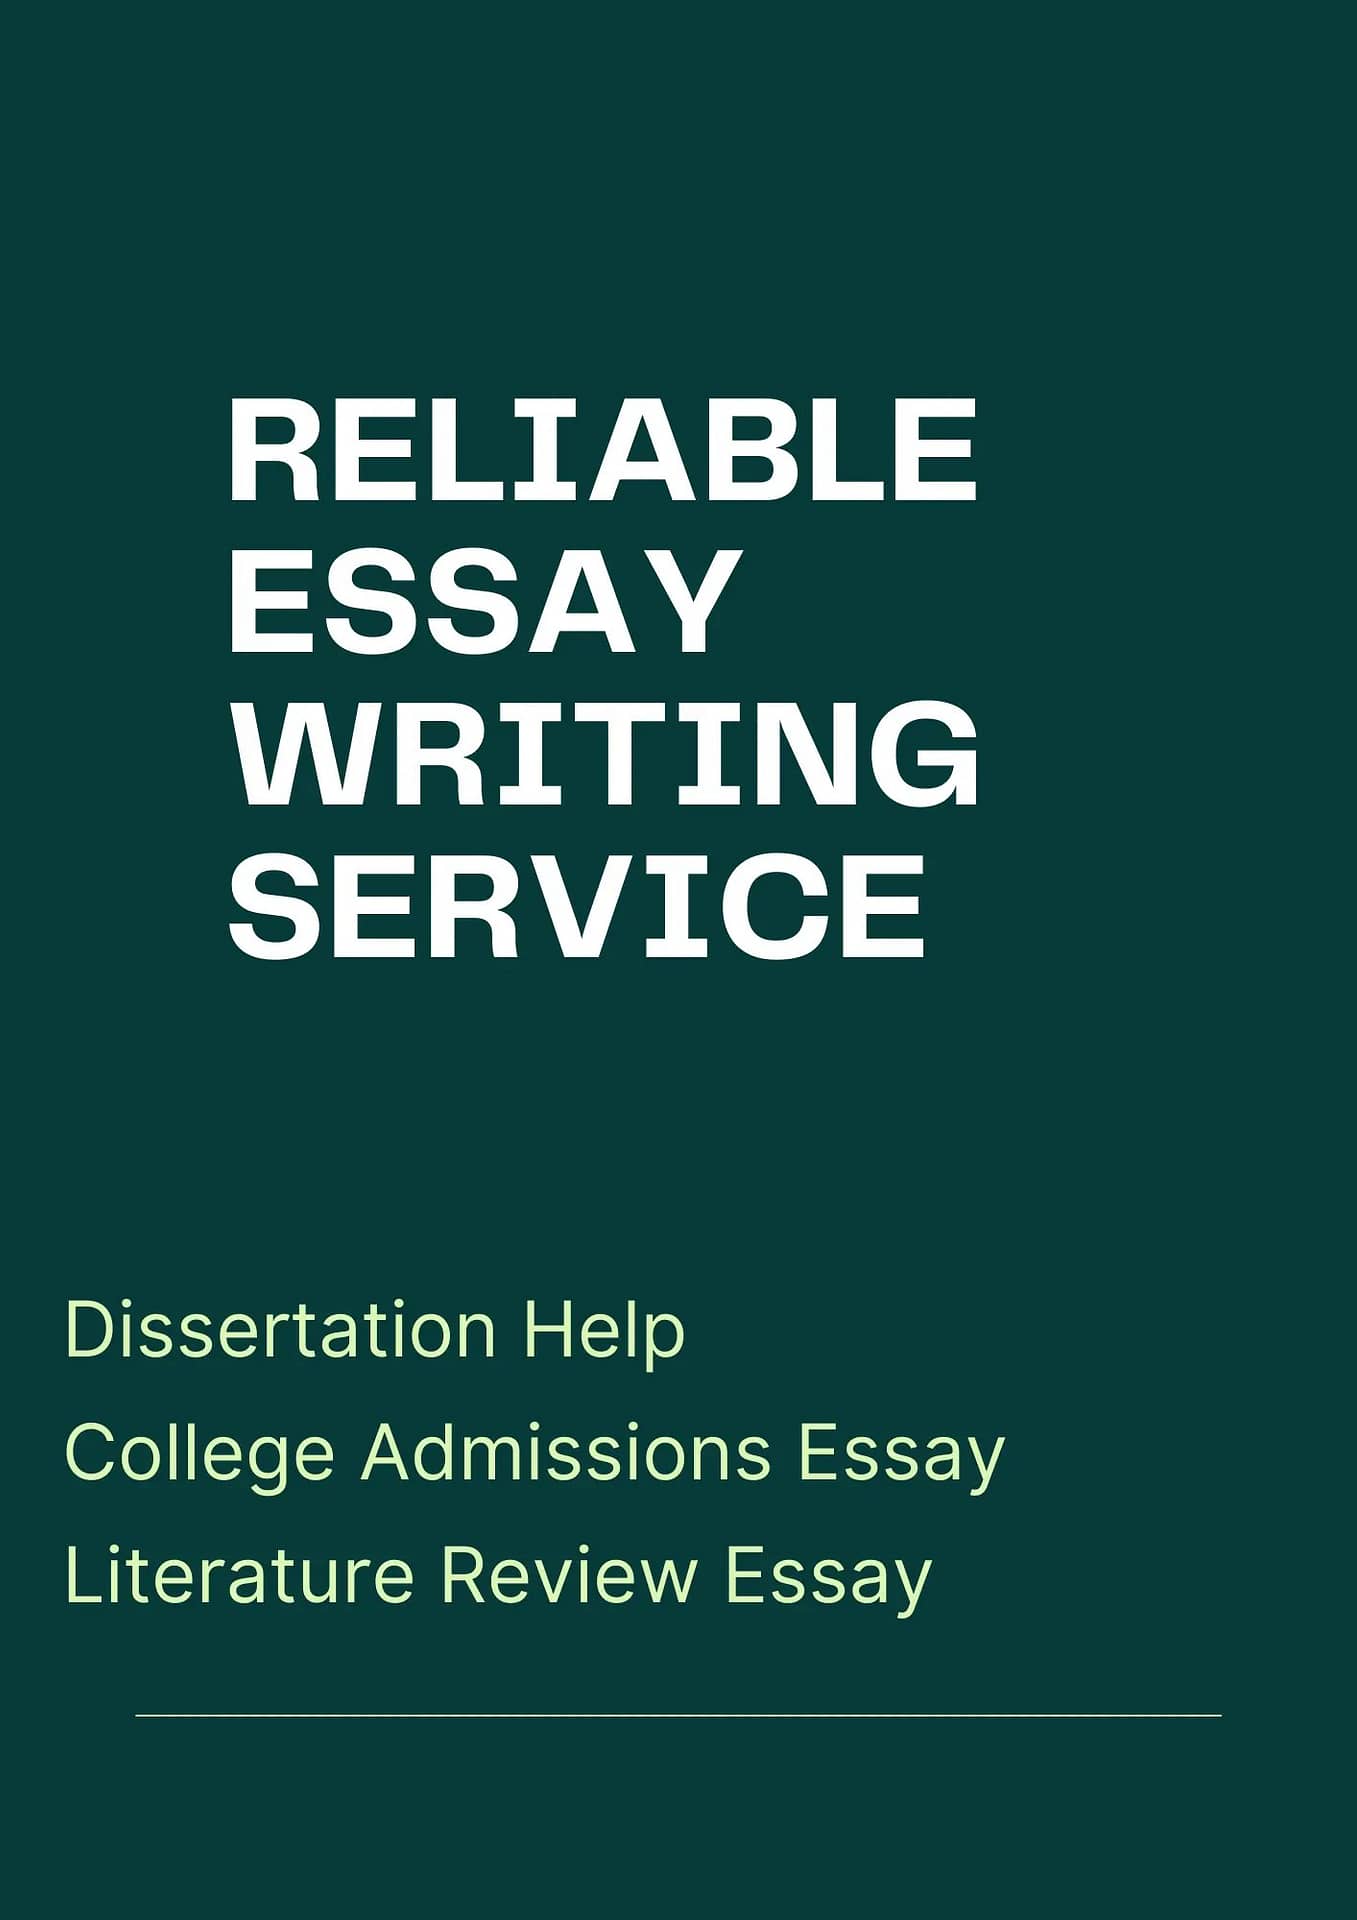 is essay service reliable